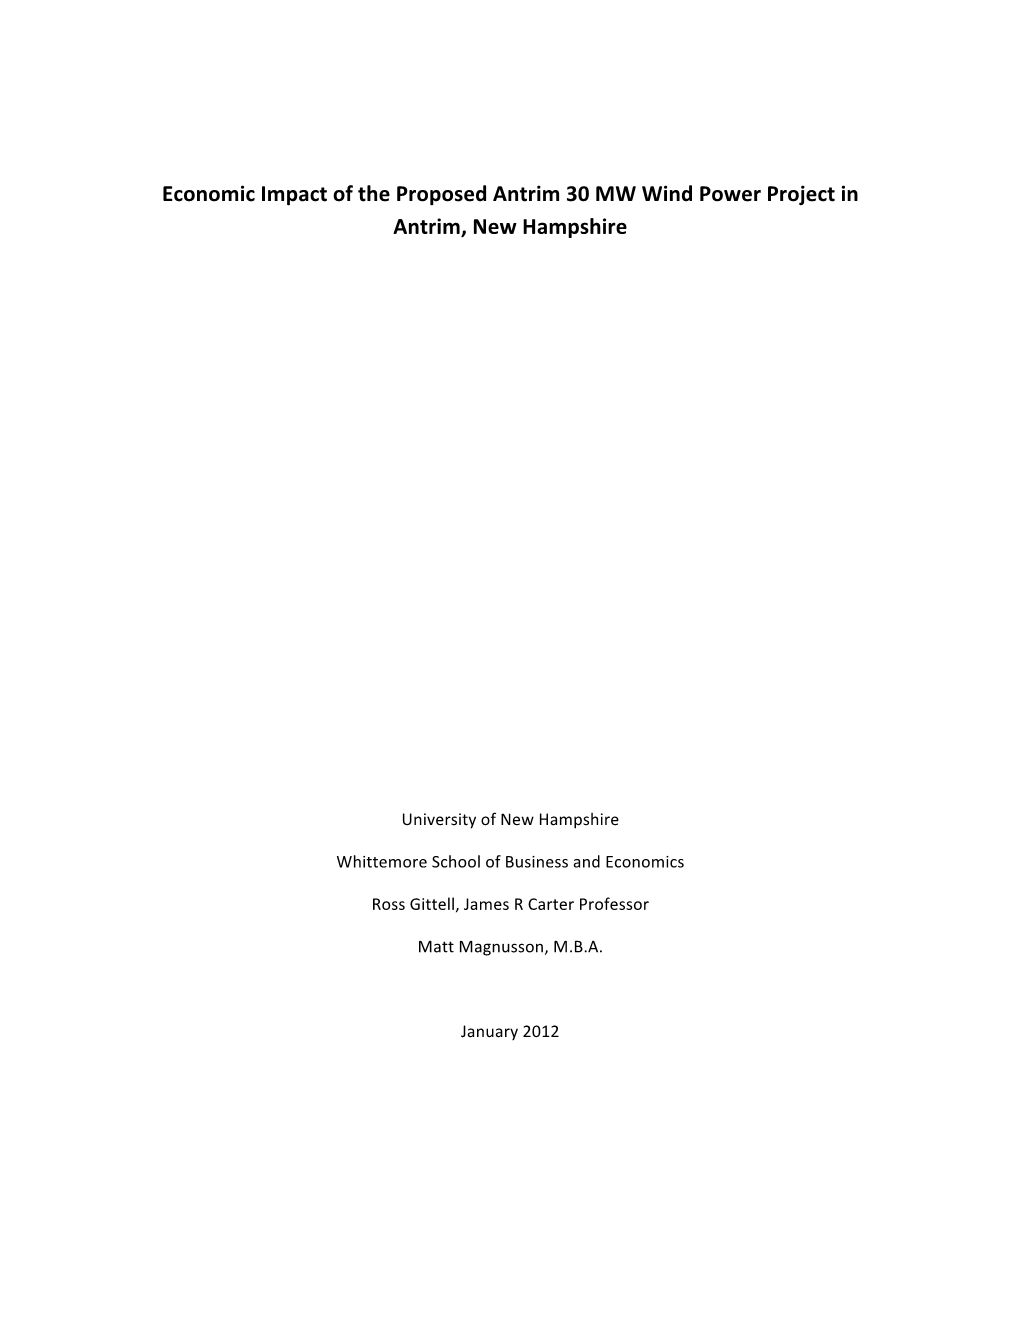 Economic Impact of the Proposed Antrim 30 MW Wind Power Project in Antrim, New Hampshire